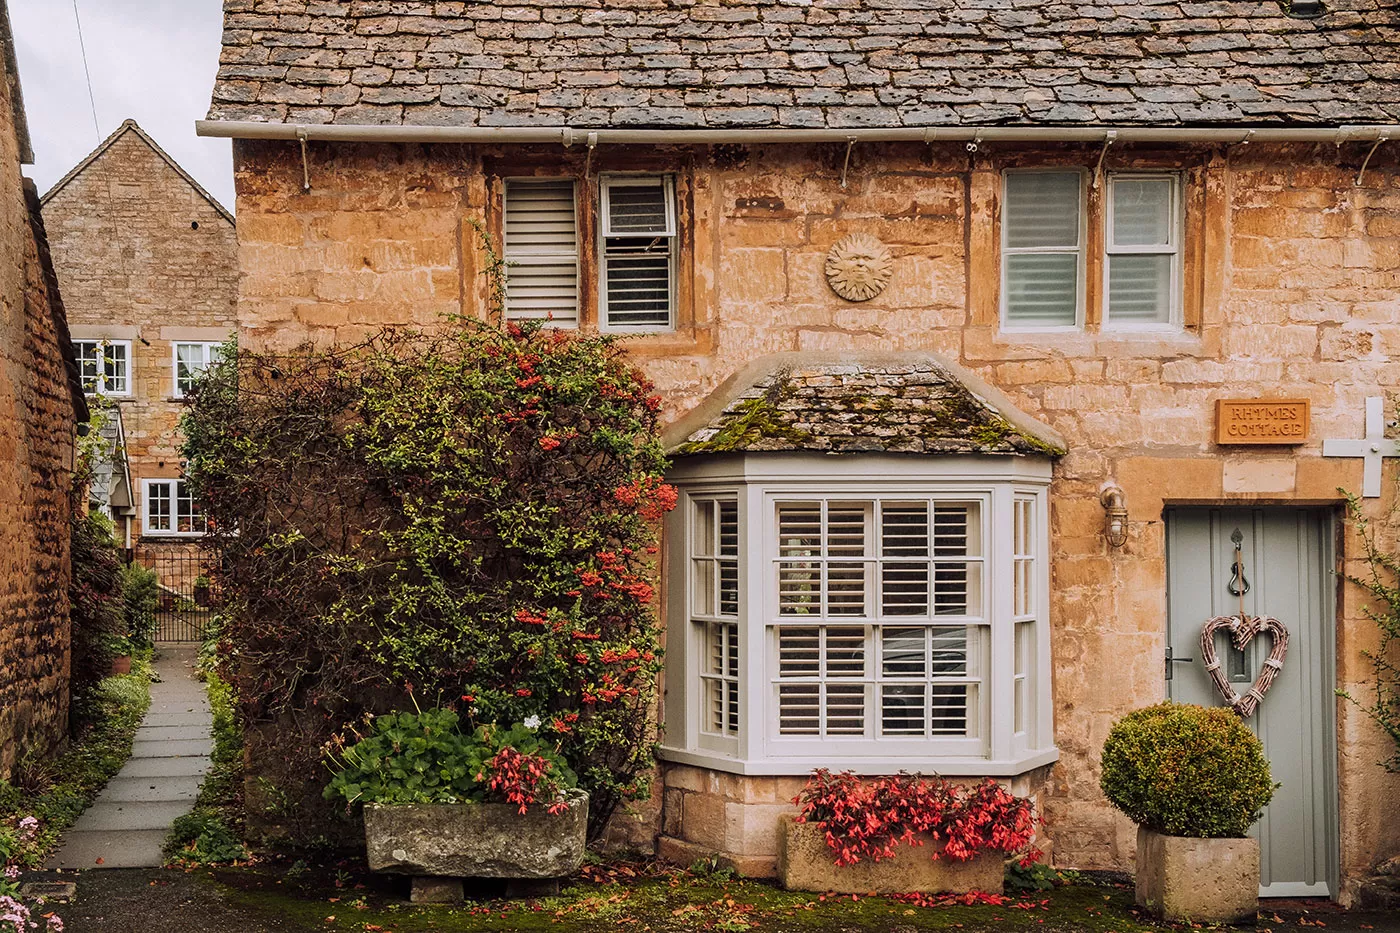 Things to do in Moreton-in-Marsh - The Cotswolds - Pretty cottage home covered in flowers